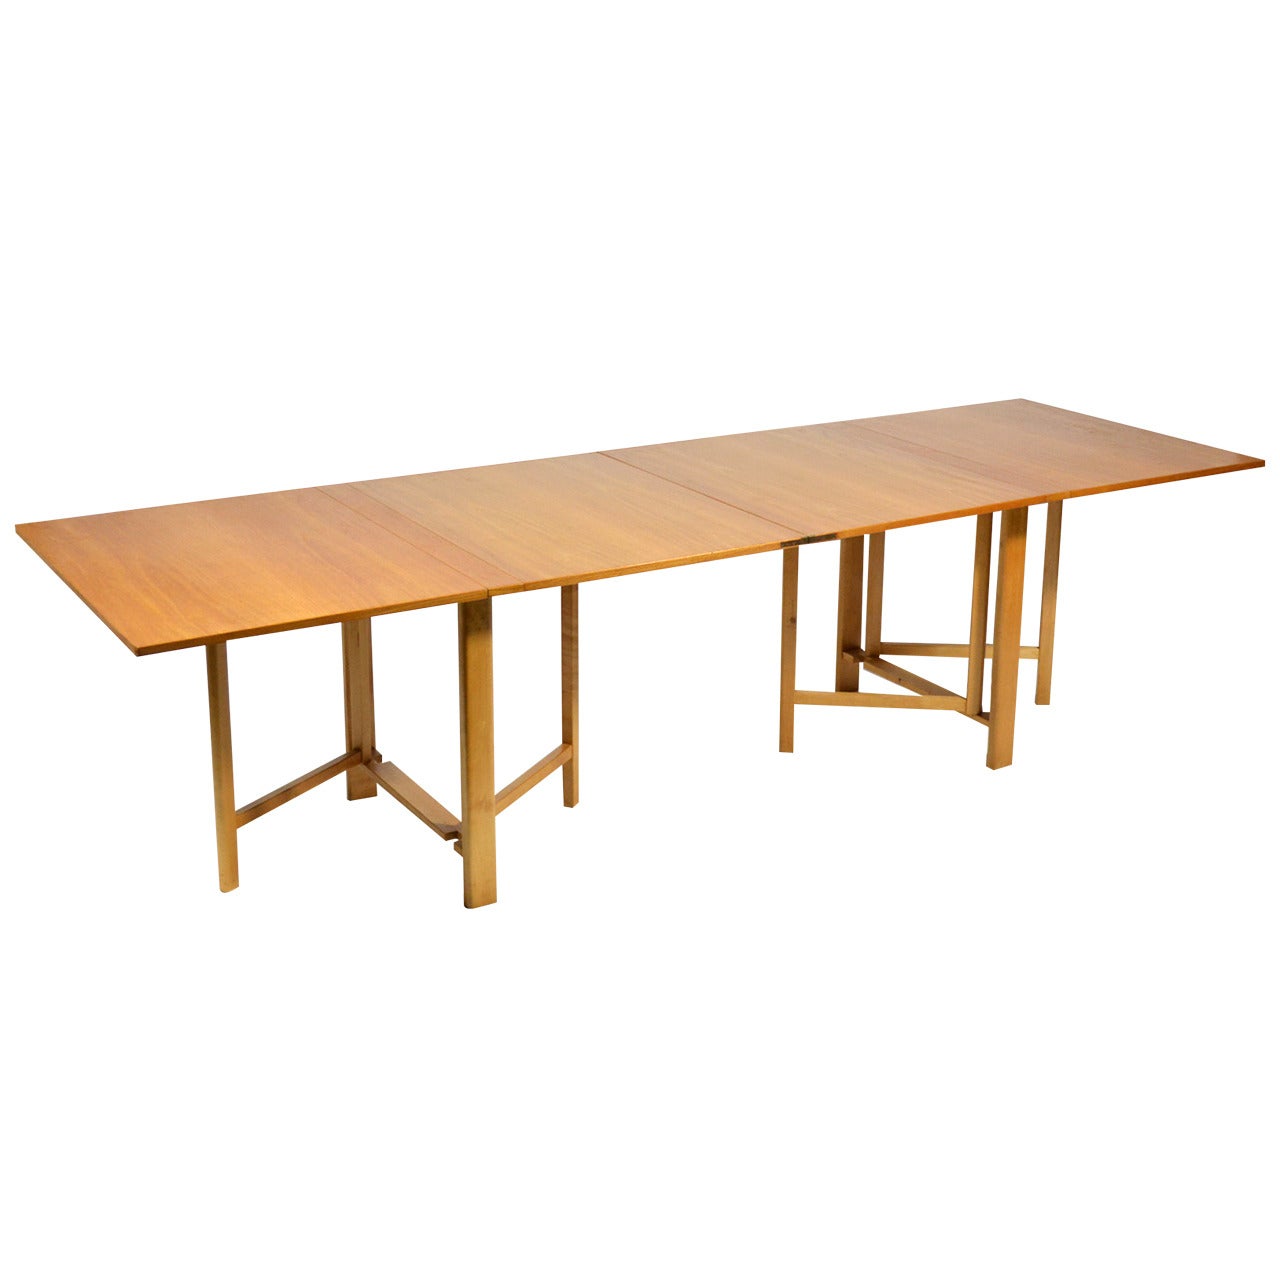 Bruno Mathsson "Maria" Expanding or Folding Table